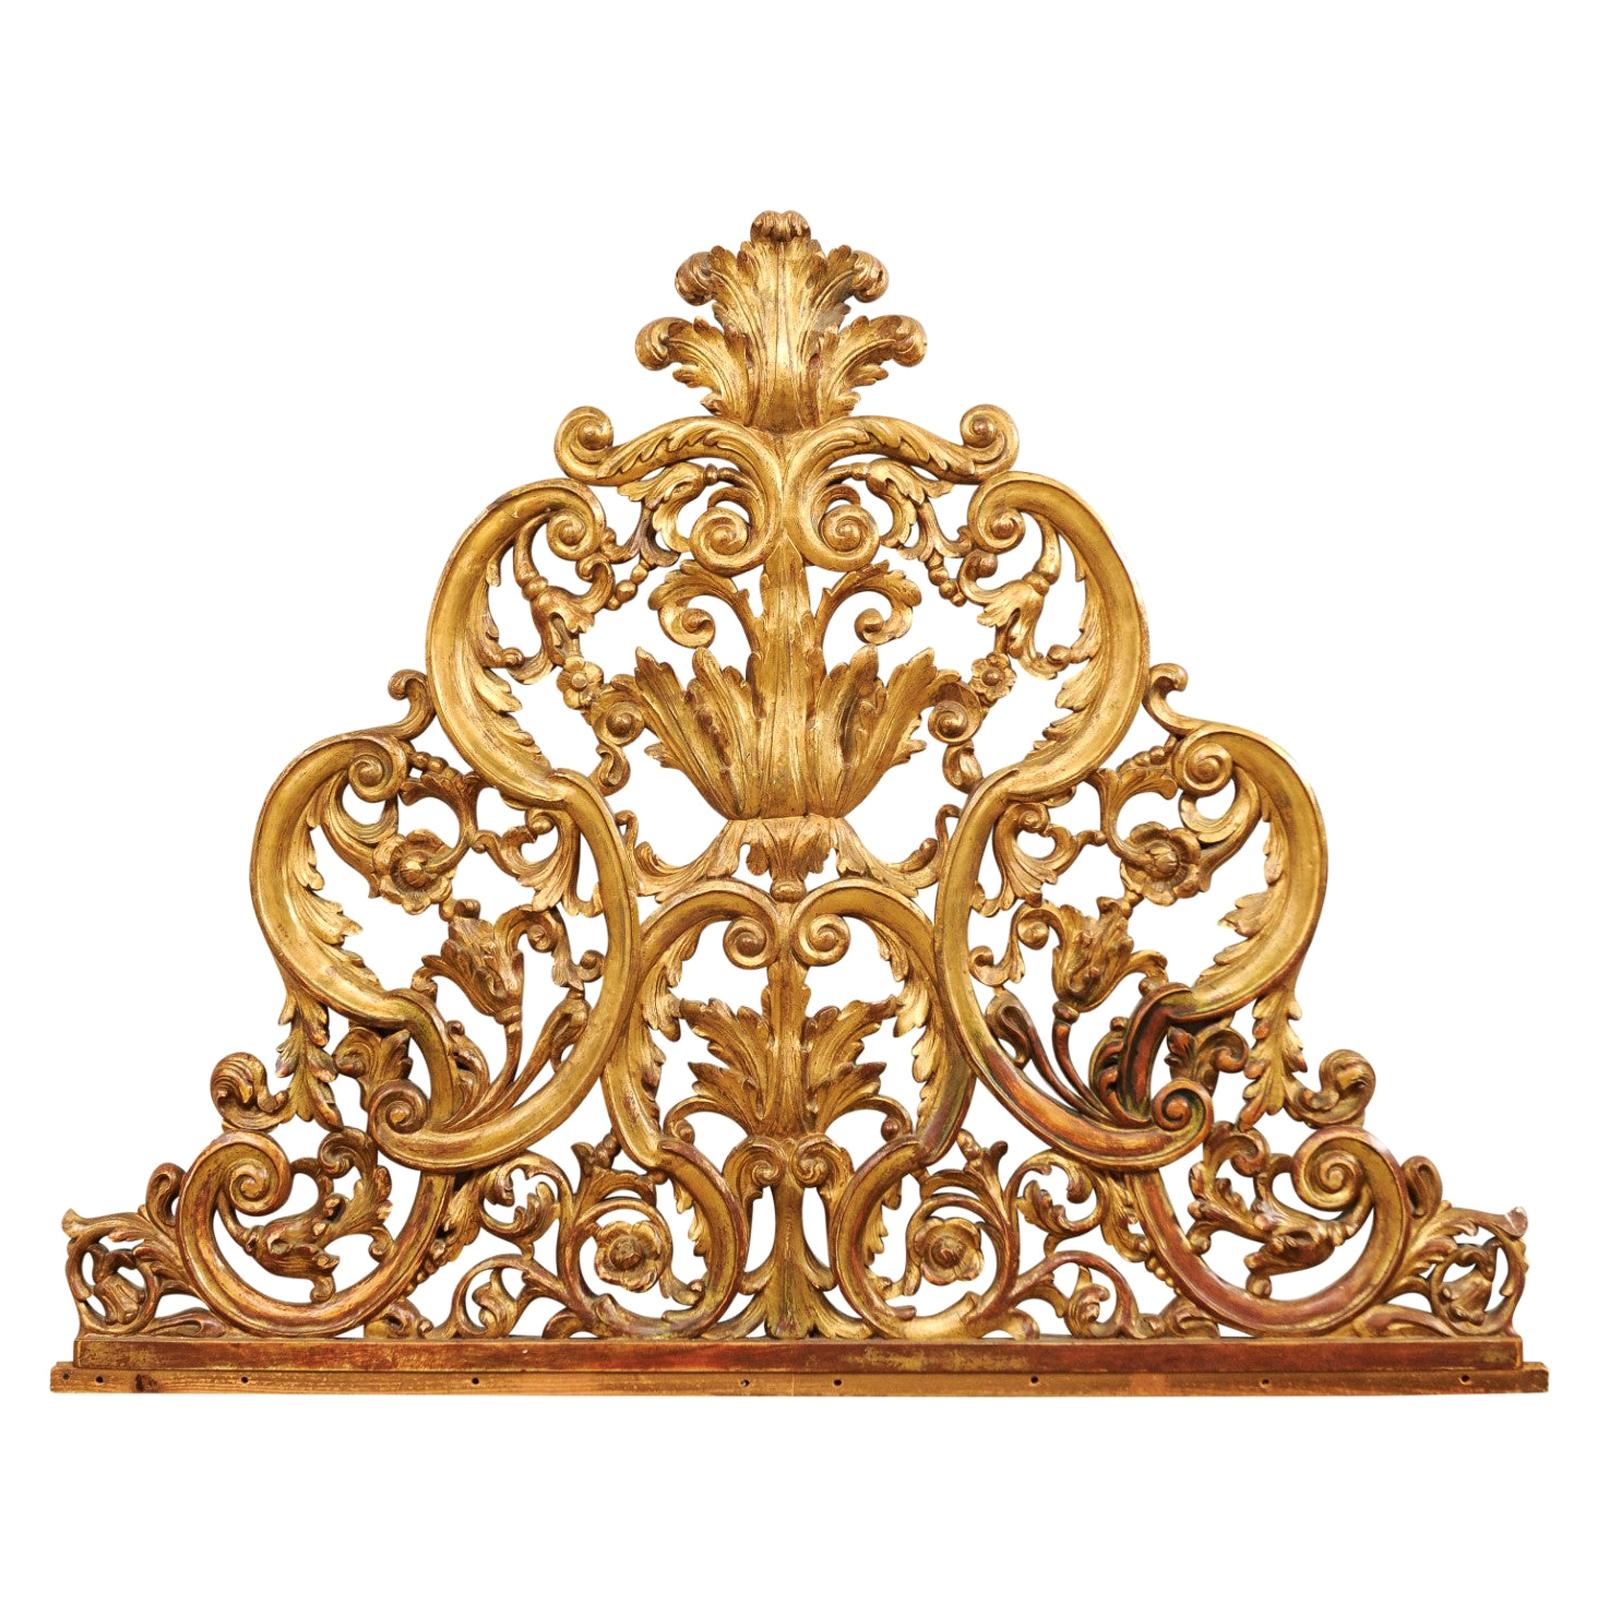 Italian Pierce-Carved and Giltwood Fragment Stands Great Headboard